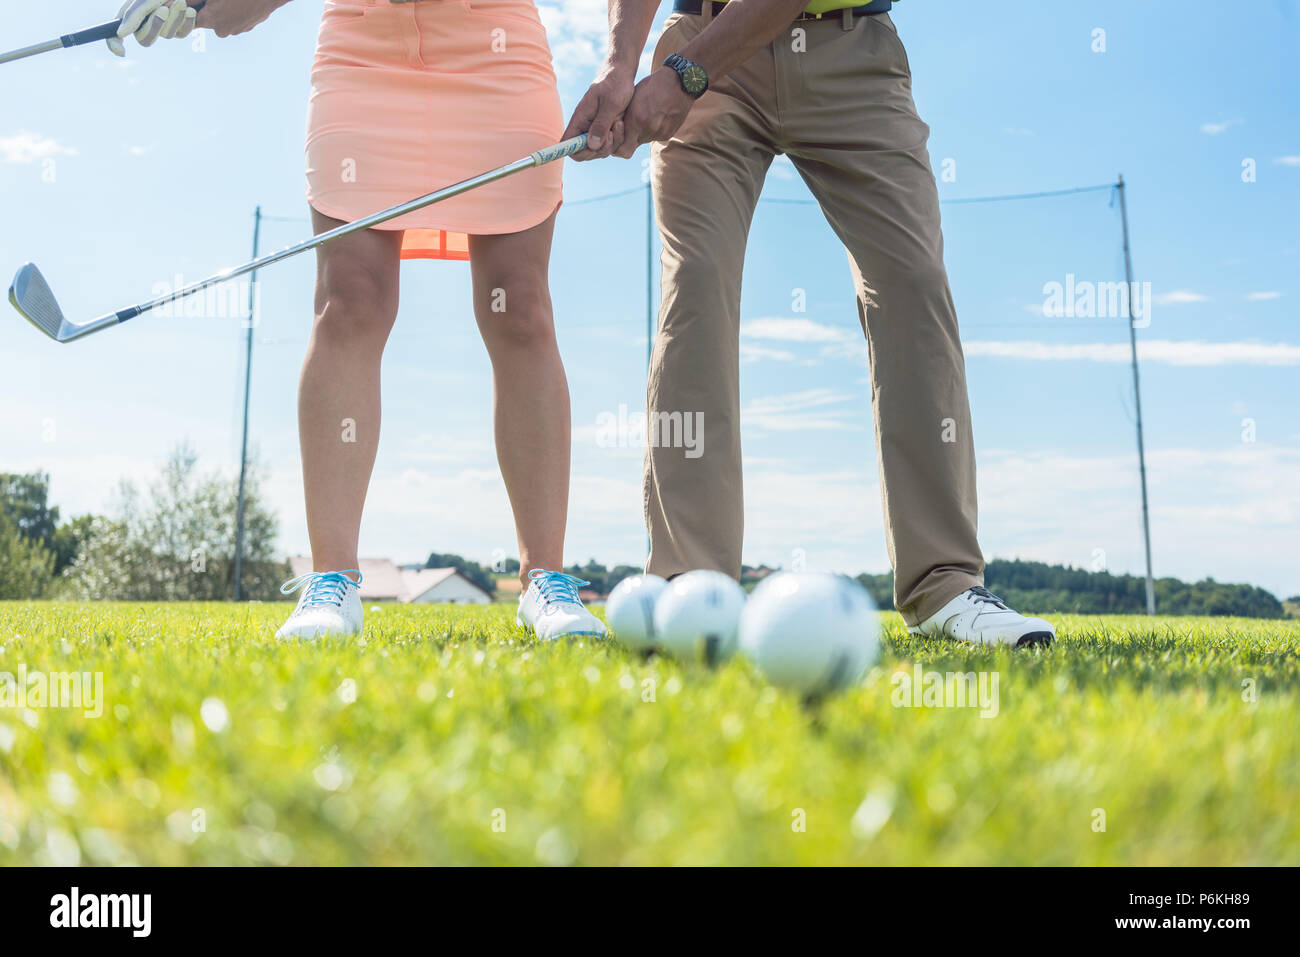 Low section of man and woman holding iron clubs while practicing Stock Photo